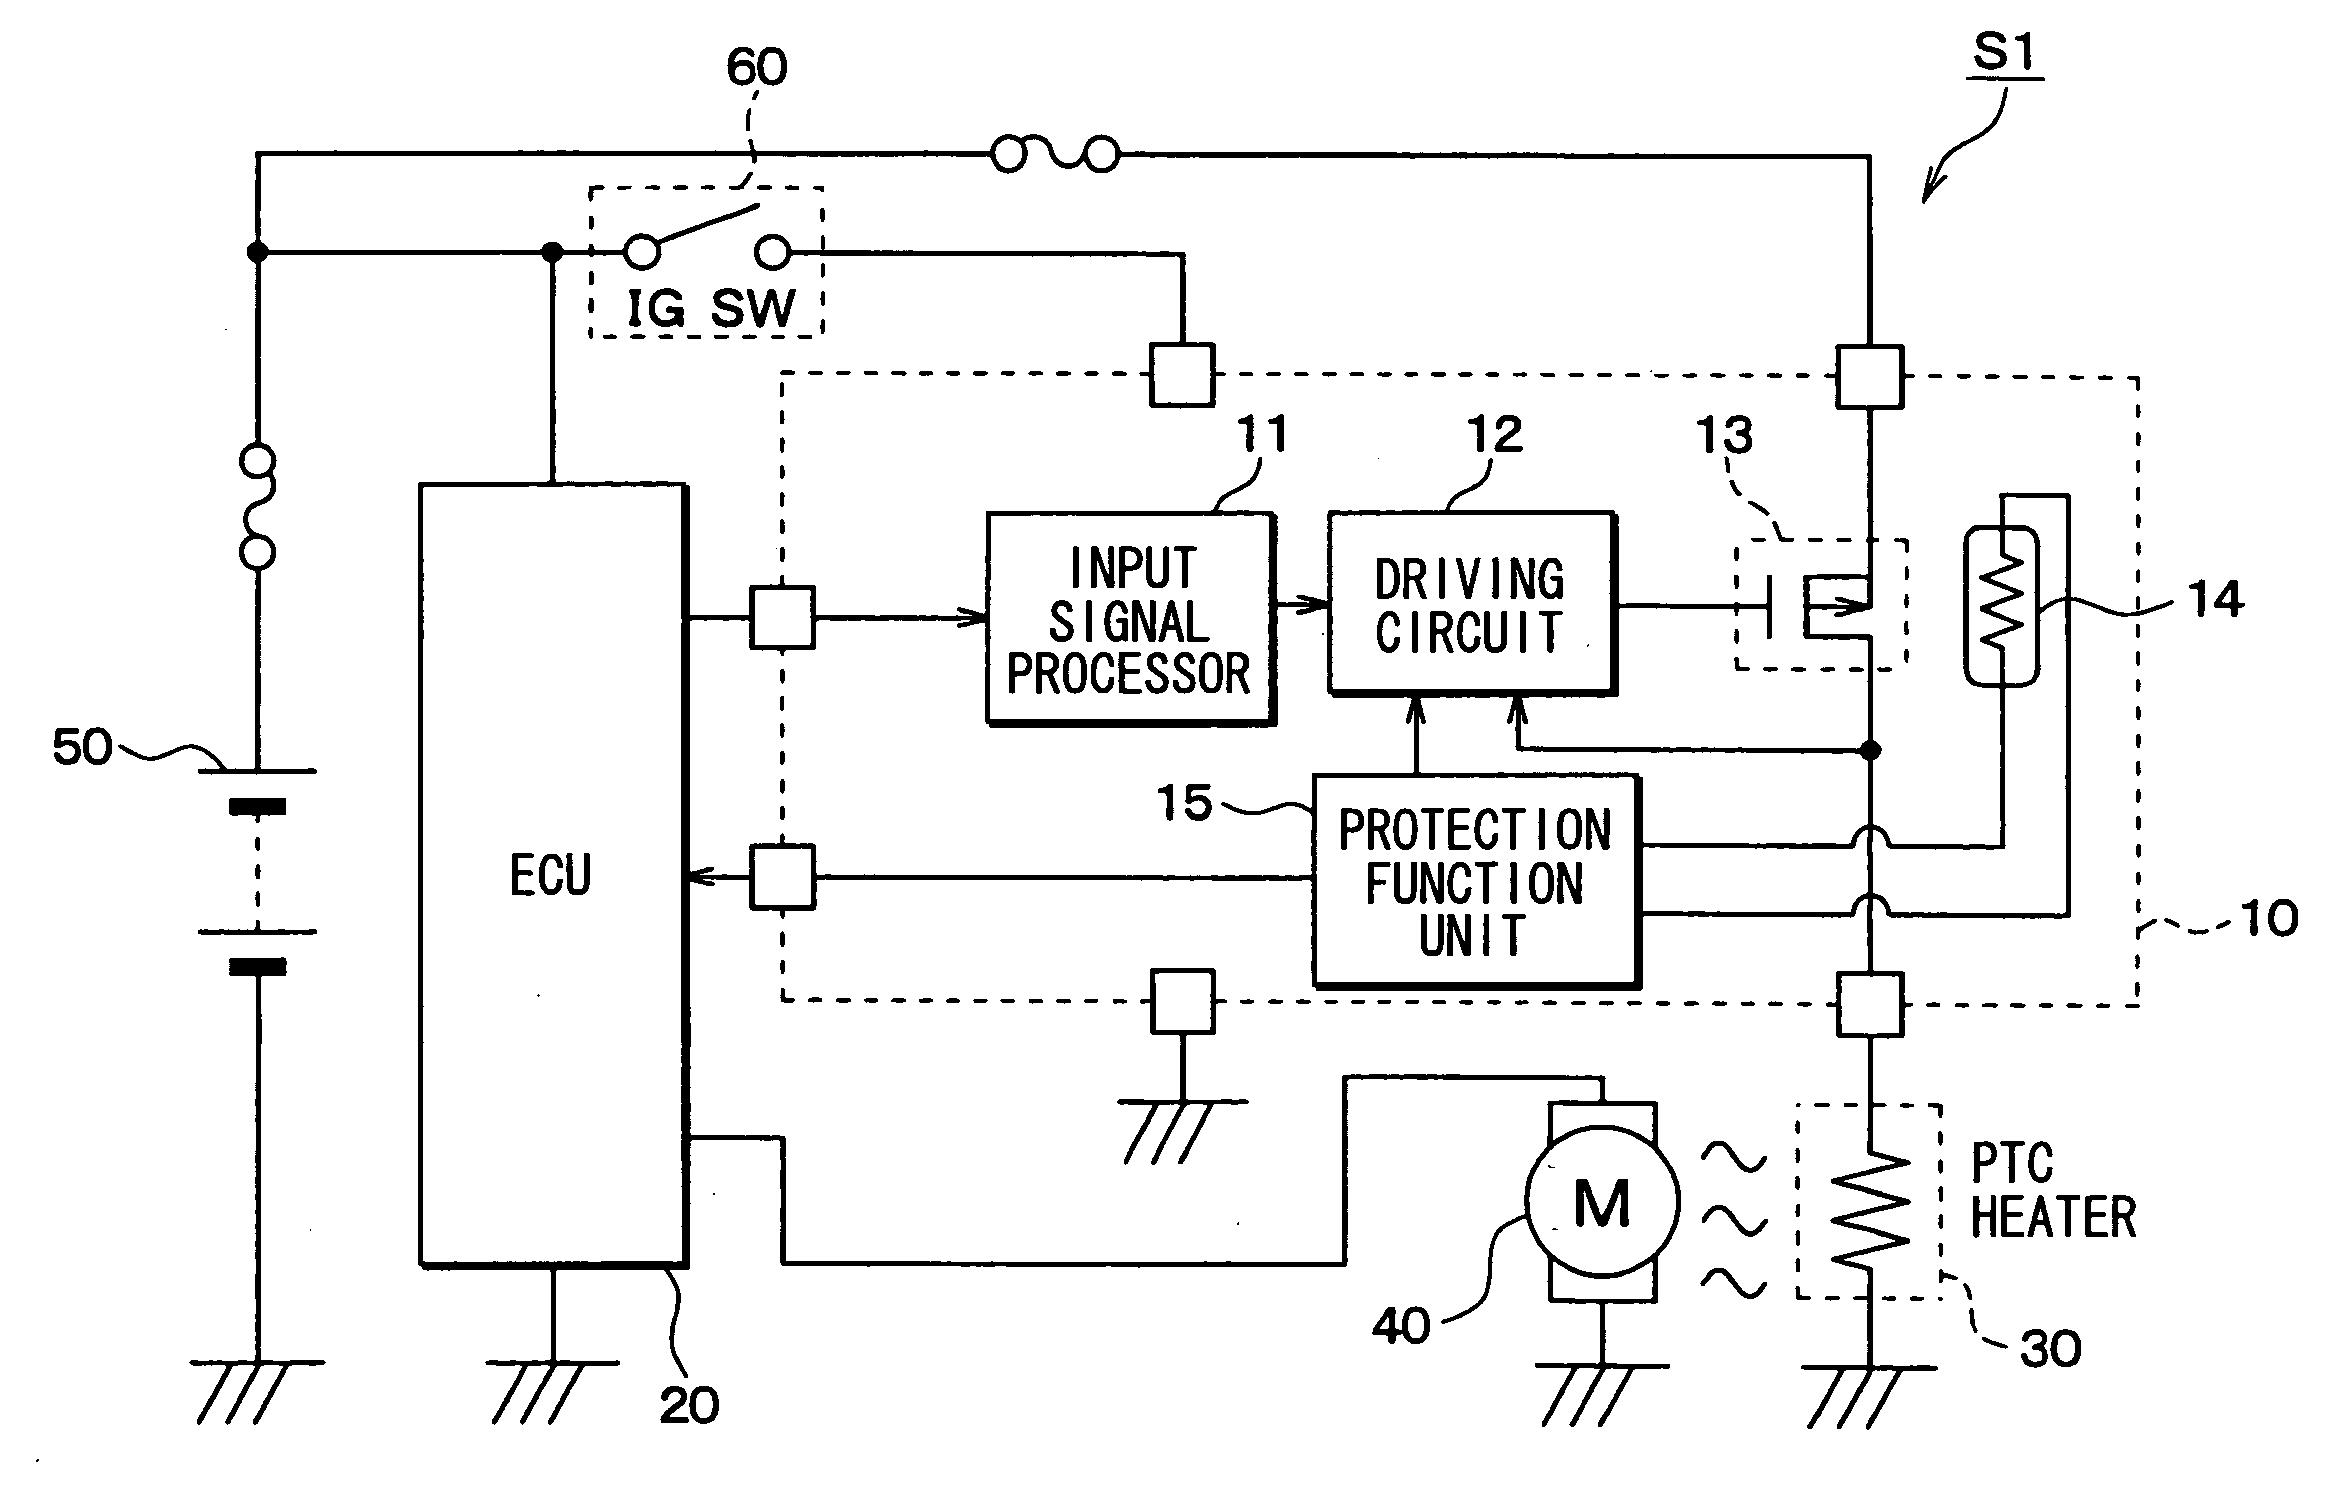 Load drive controller and control system